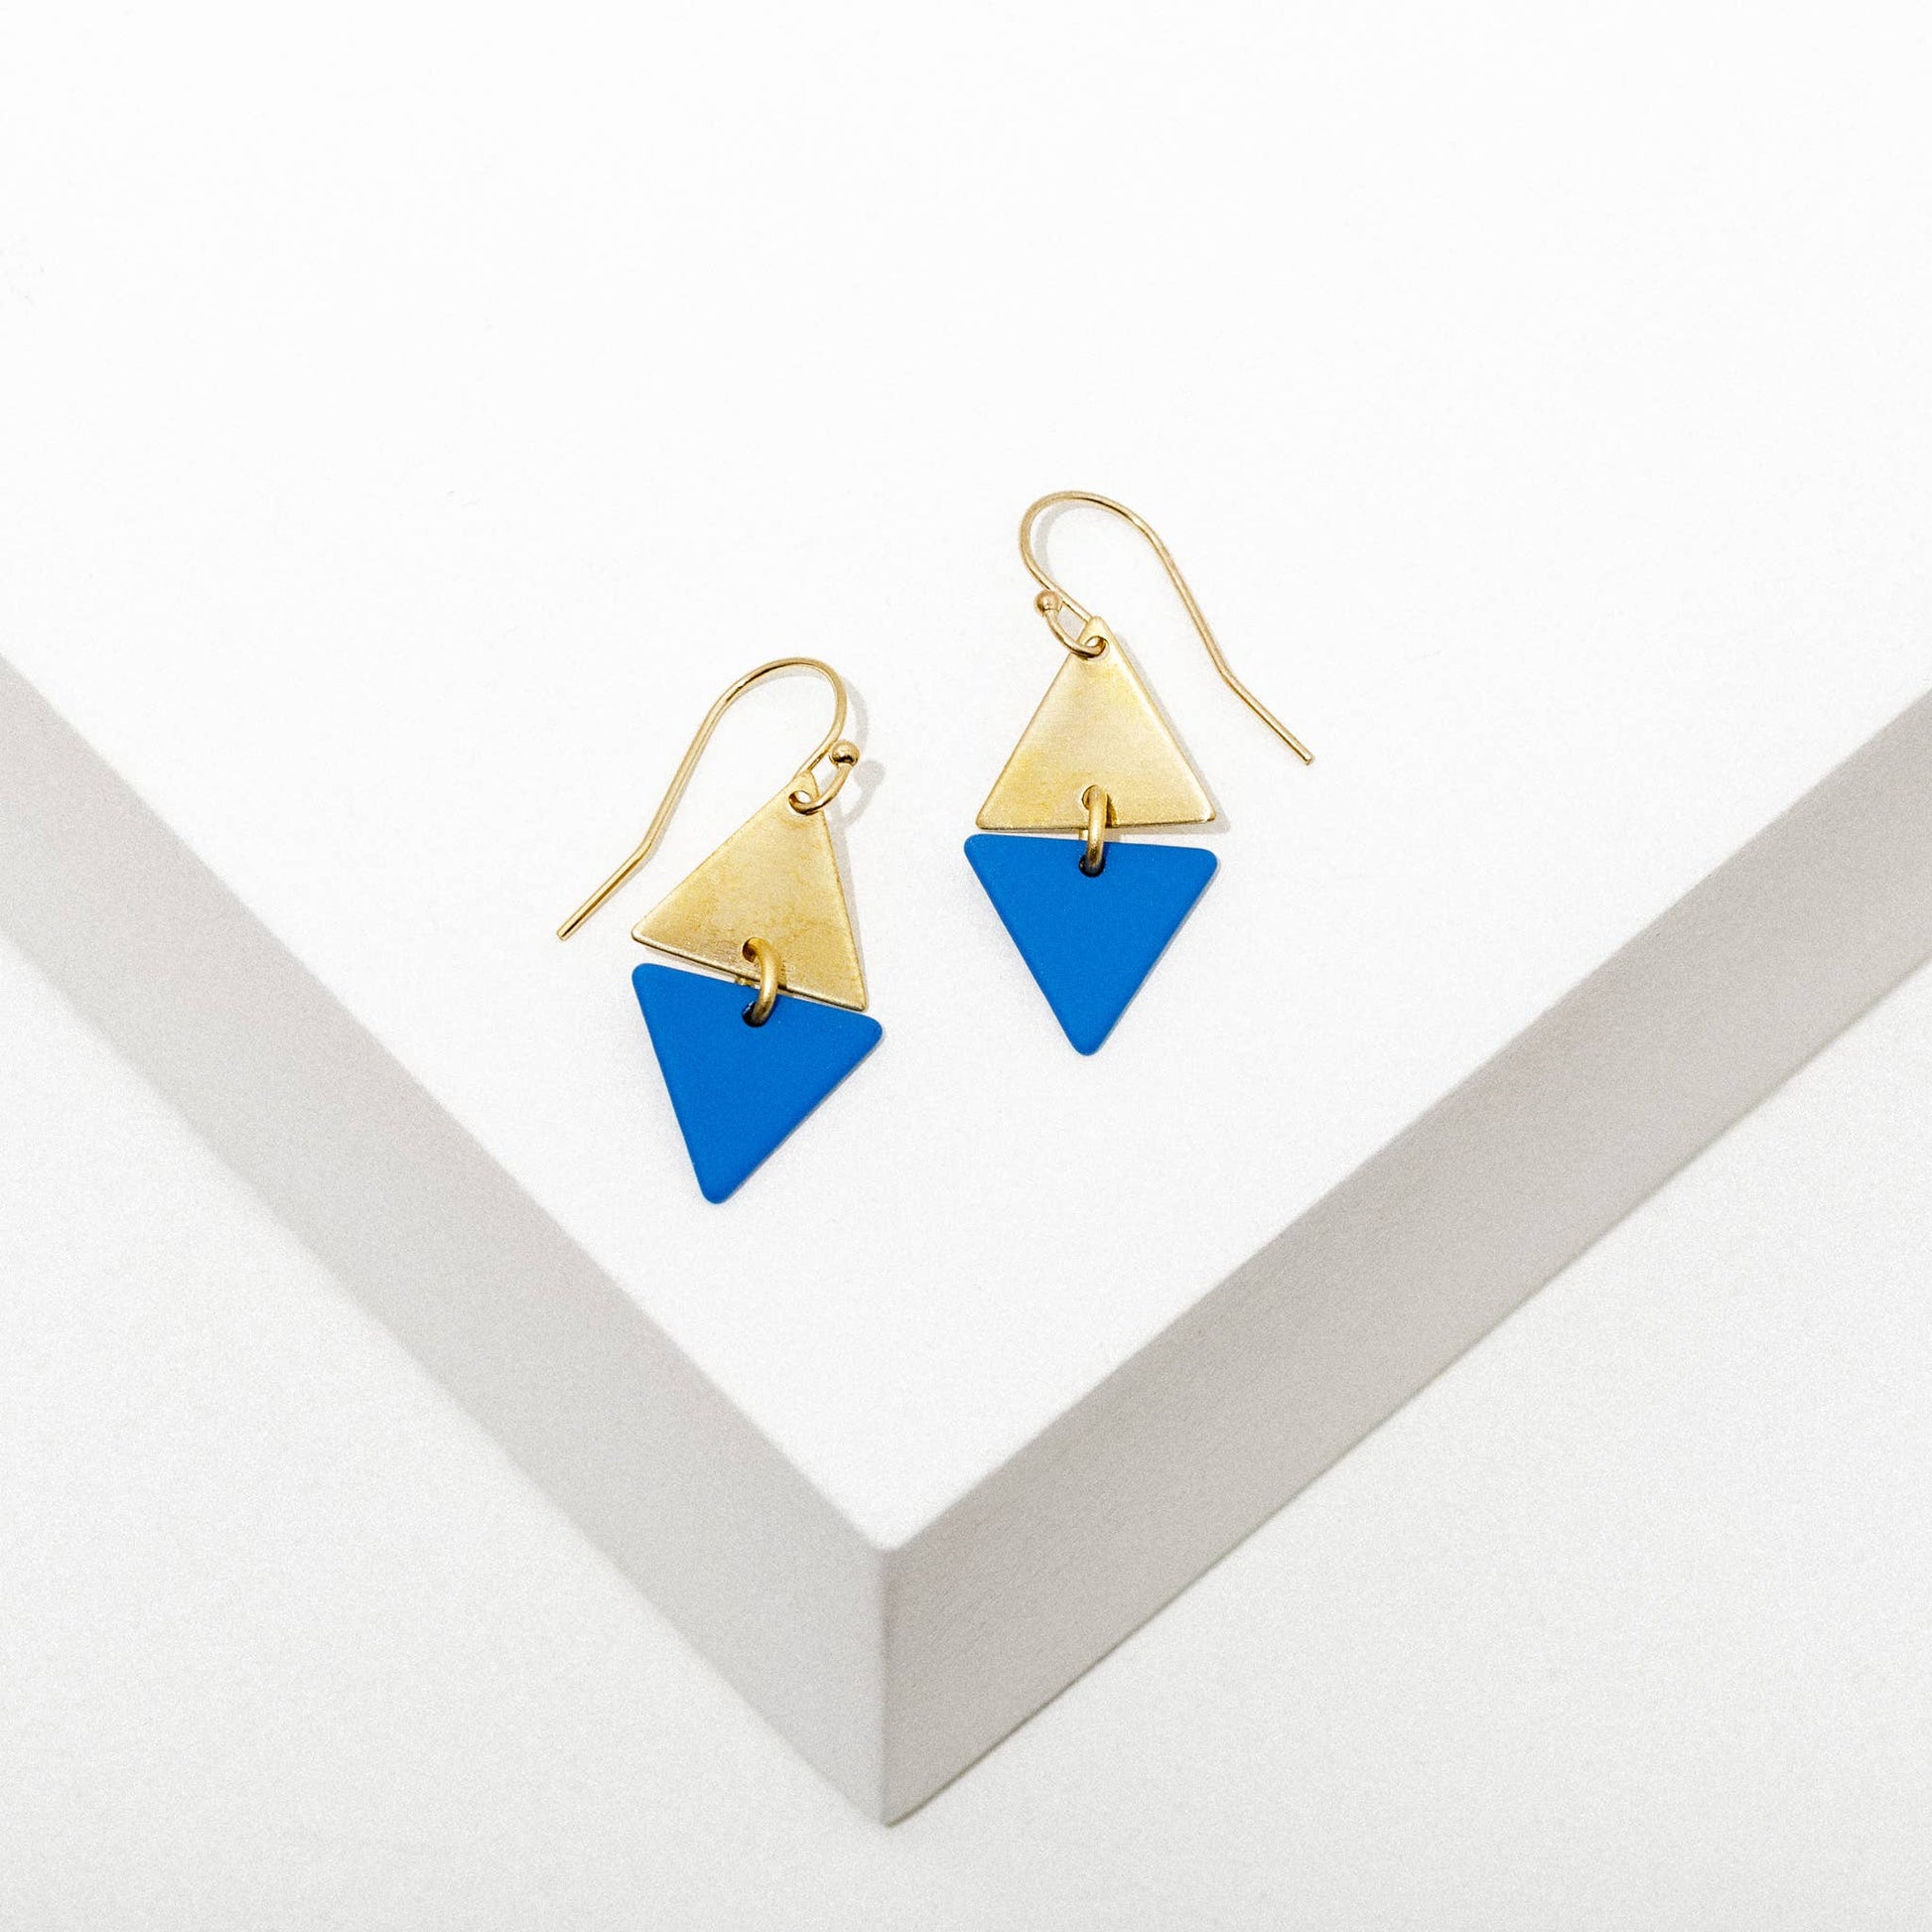 Larissa Loden - Alta Earrings  Larissa Loden   -better made easy-eco-friendly-sustainable-gifting